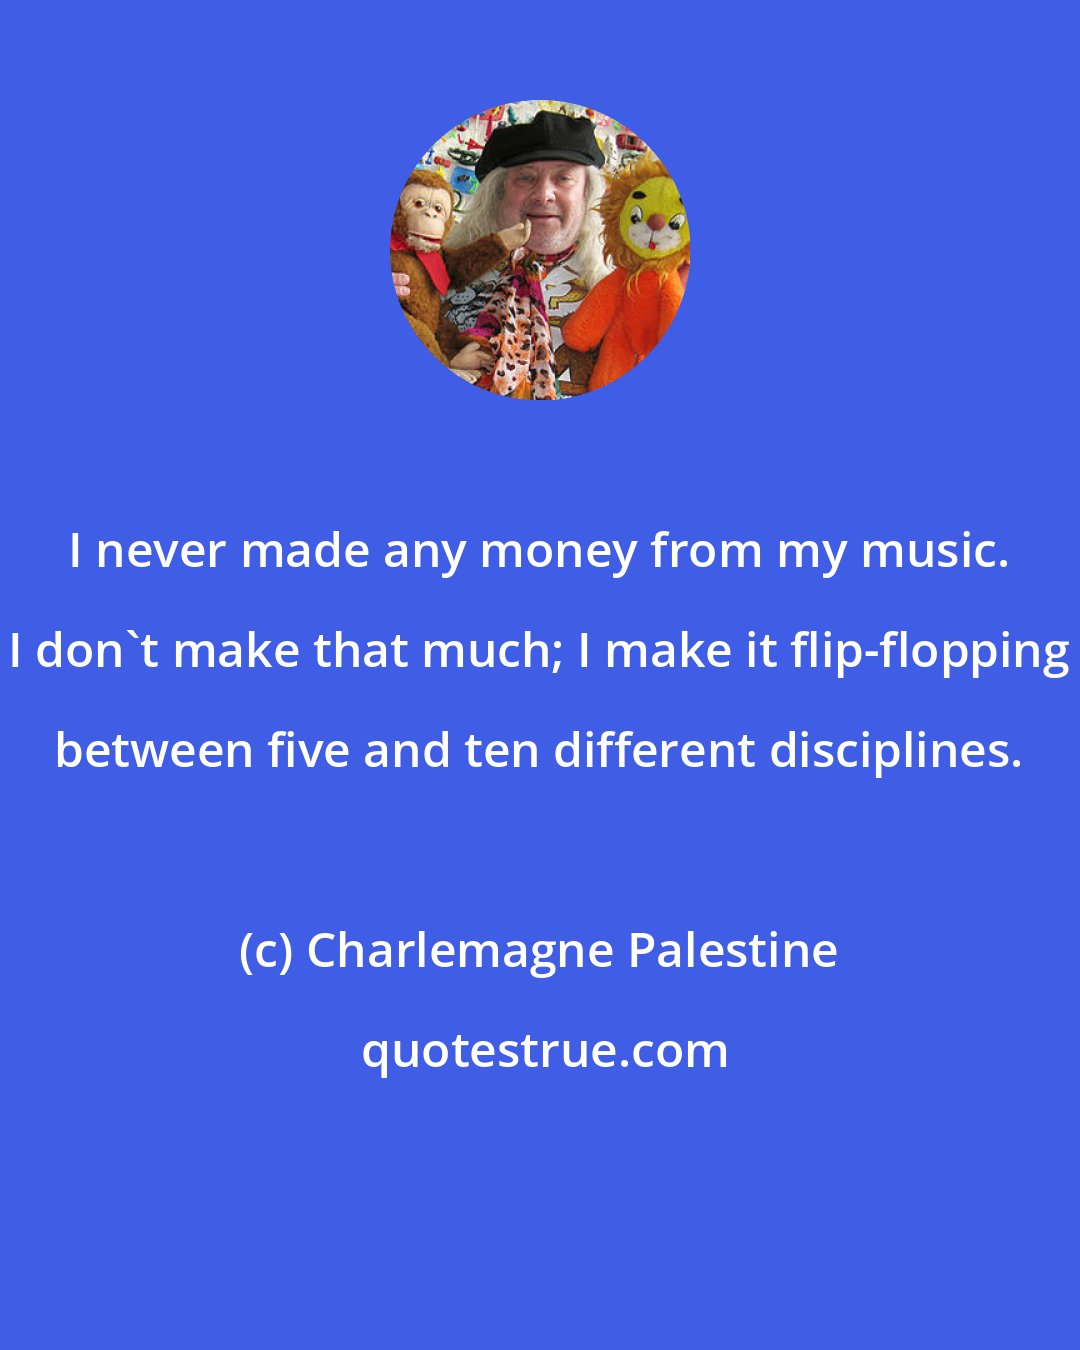 Charlemagne Palestine: I never made any money from my music. I don't make that much; I make it flip-flopping between five and ten different disciplines.